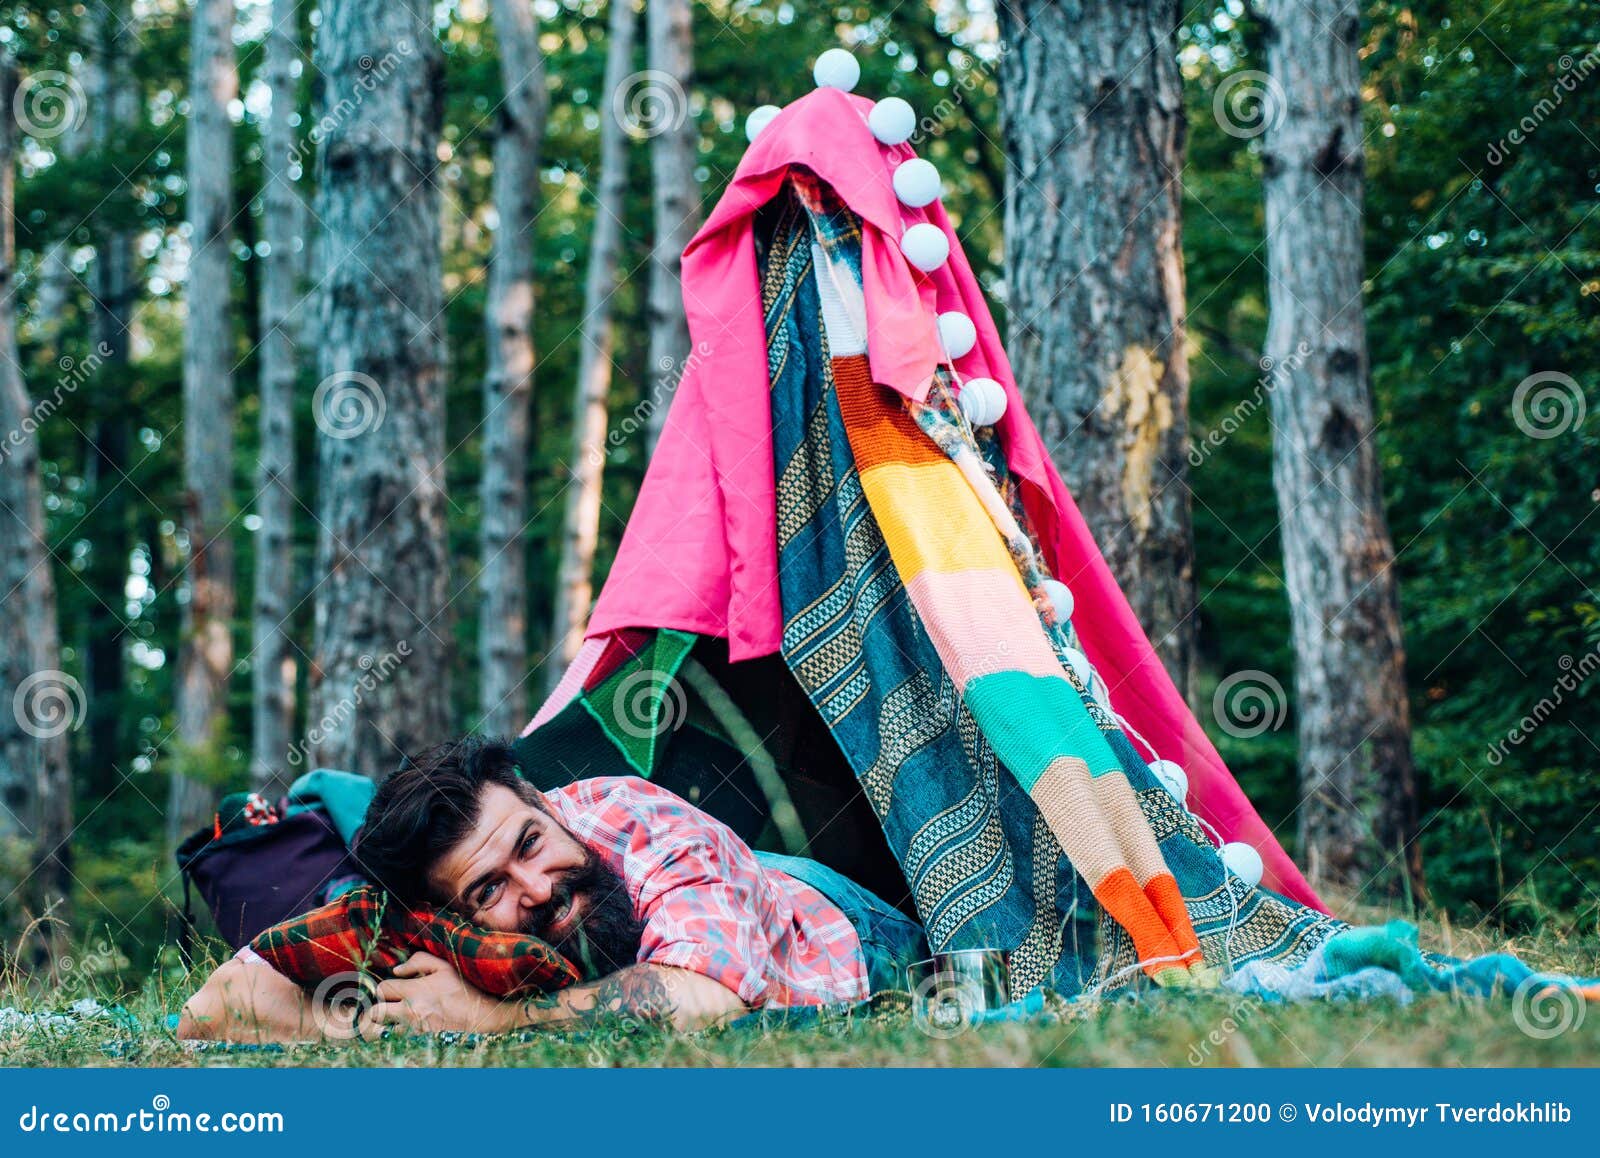 Camping Outdoor To Nature. Travel Outdoor Activity Concept. Play Tent. Story in Hovel. Tourism Rest on Stock - Image of cabin, campsite: 160671200